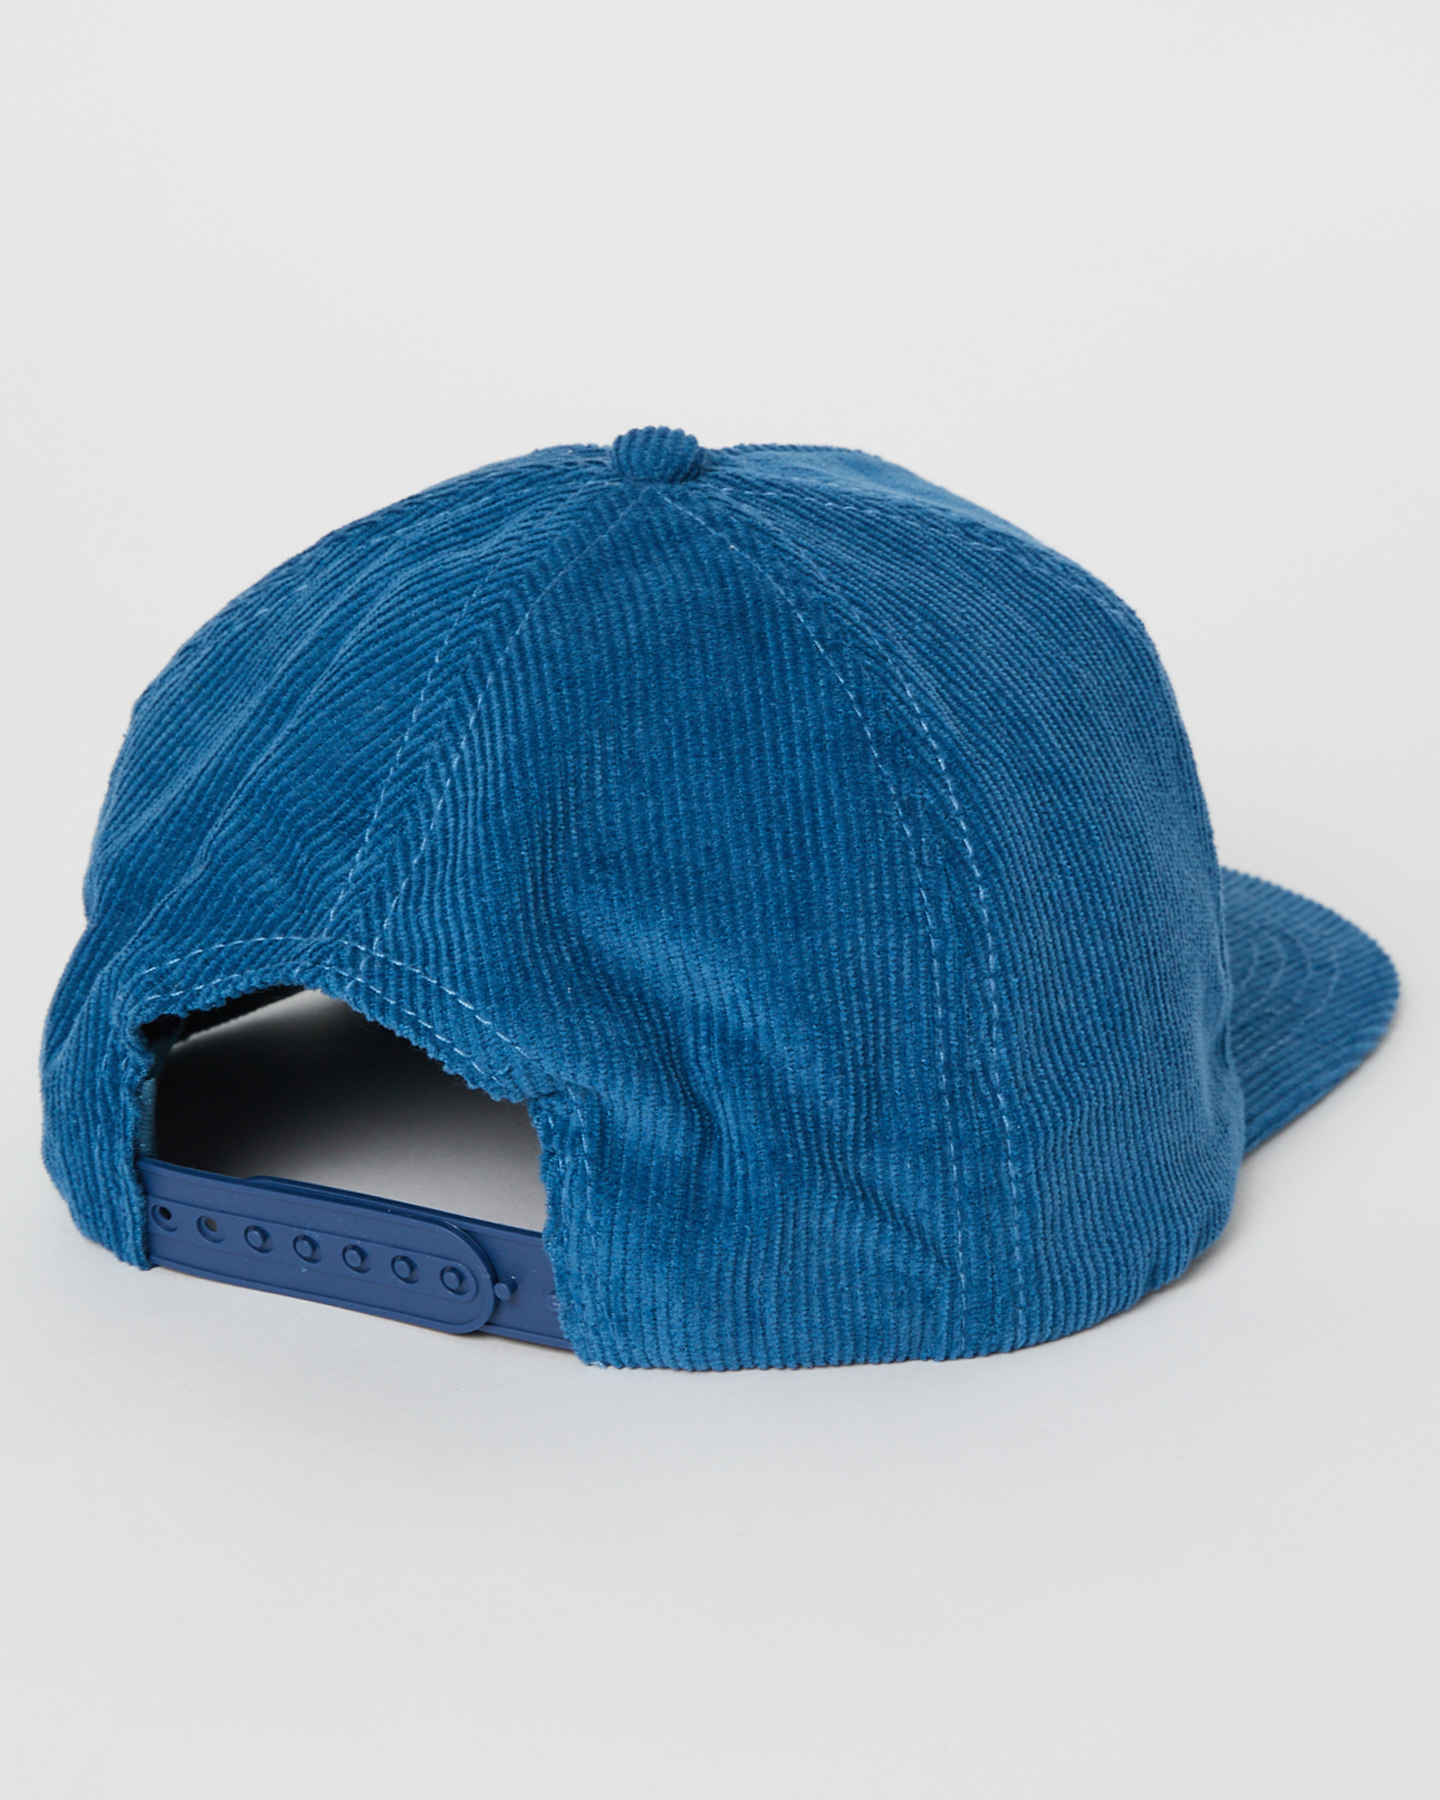 The Lobster Shanty Gold Label Cap - Blue | SurfStitch